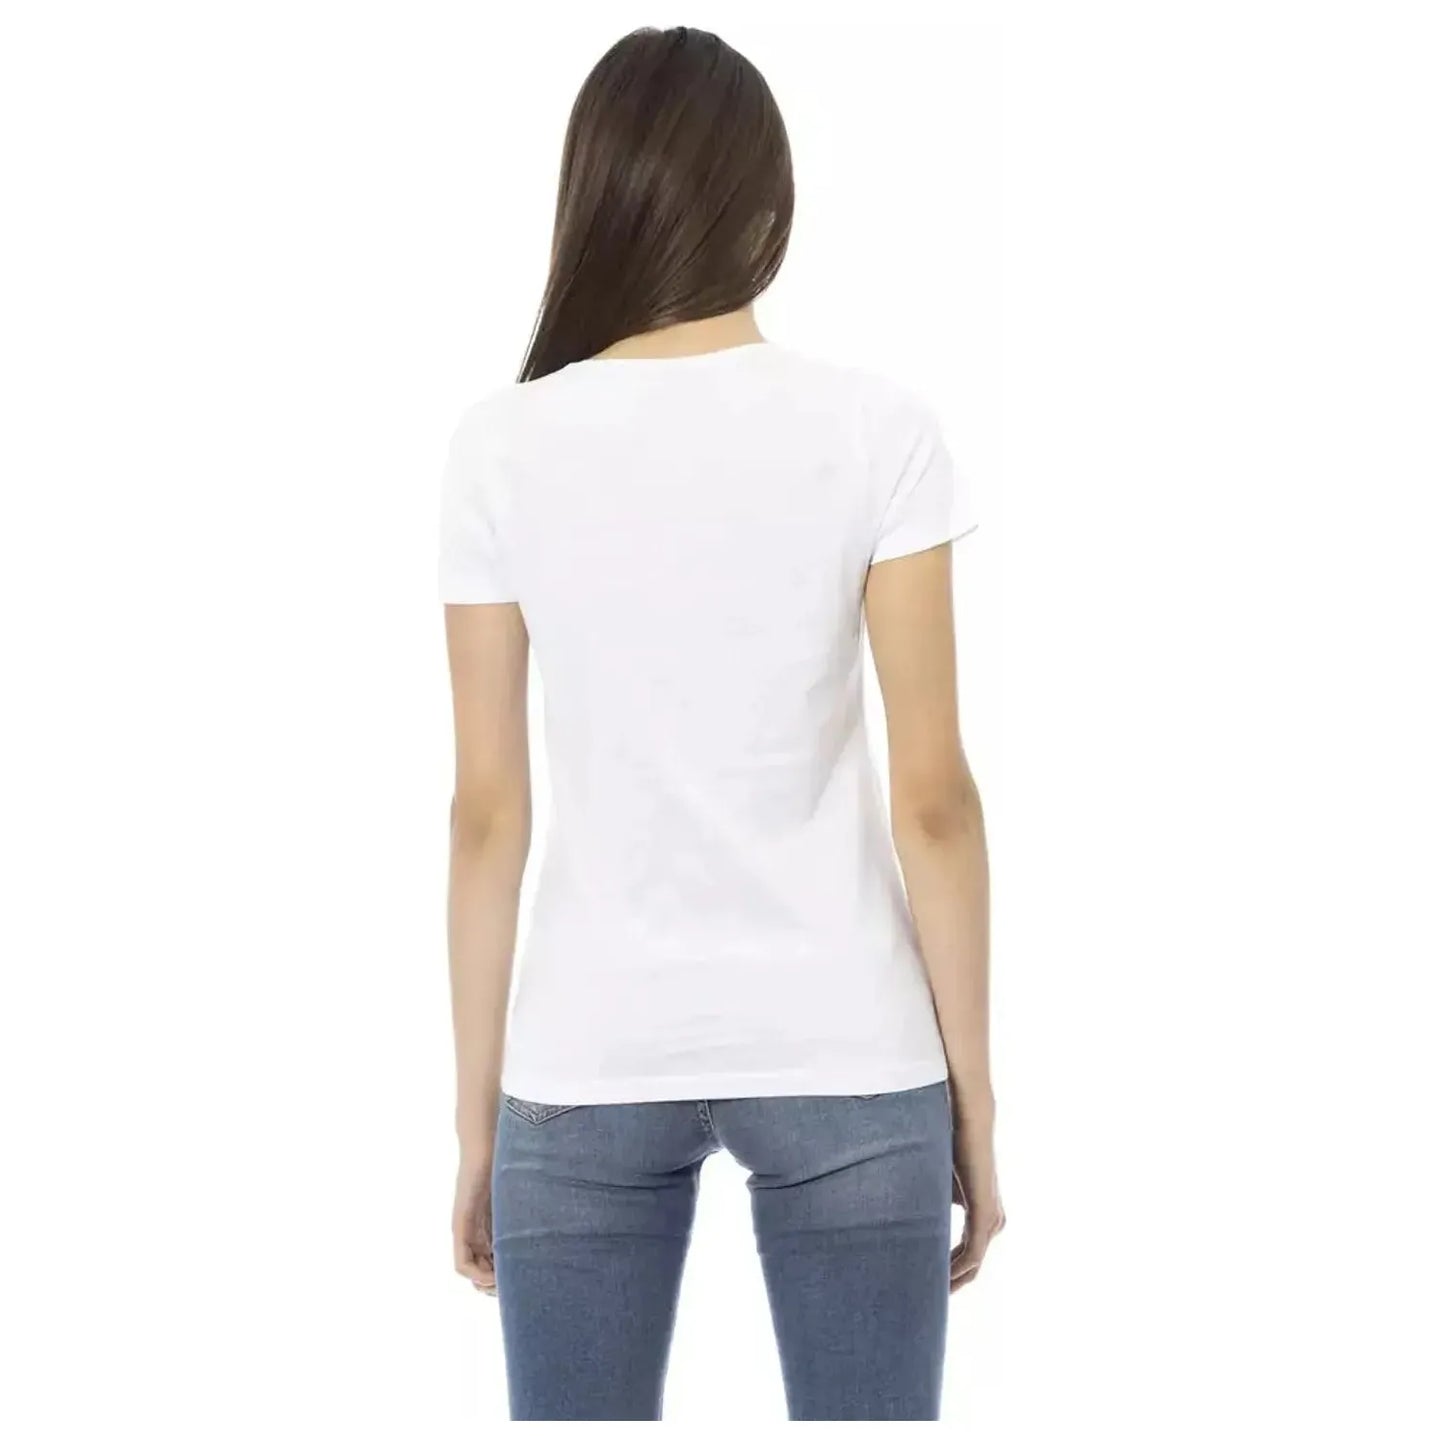 Trussardi Action Chic White Tee with Elegant Front Print white-cotton-tops-t-shirt-111